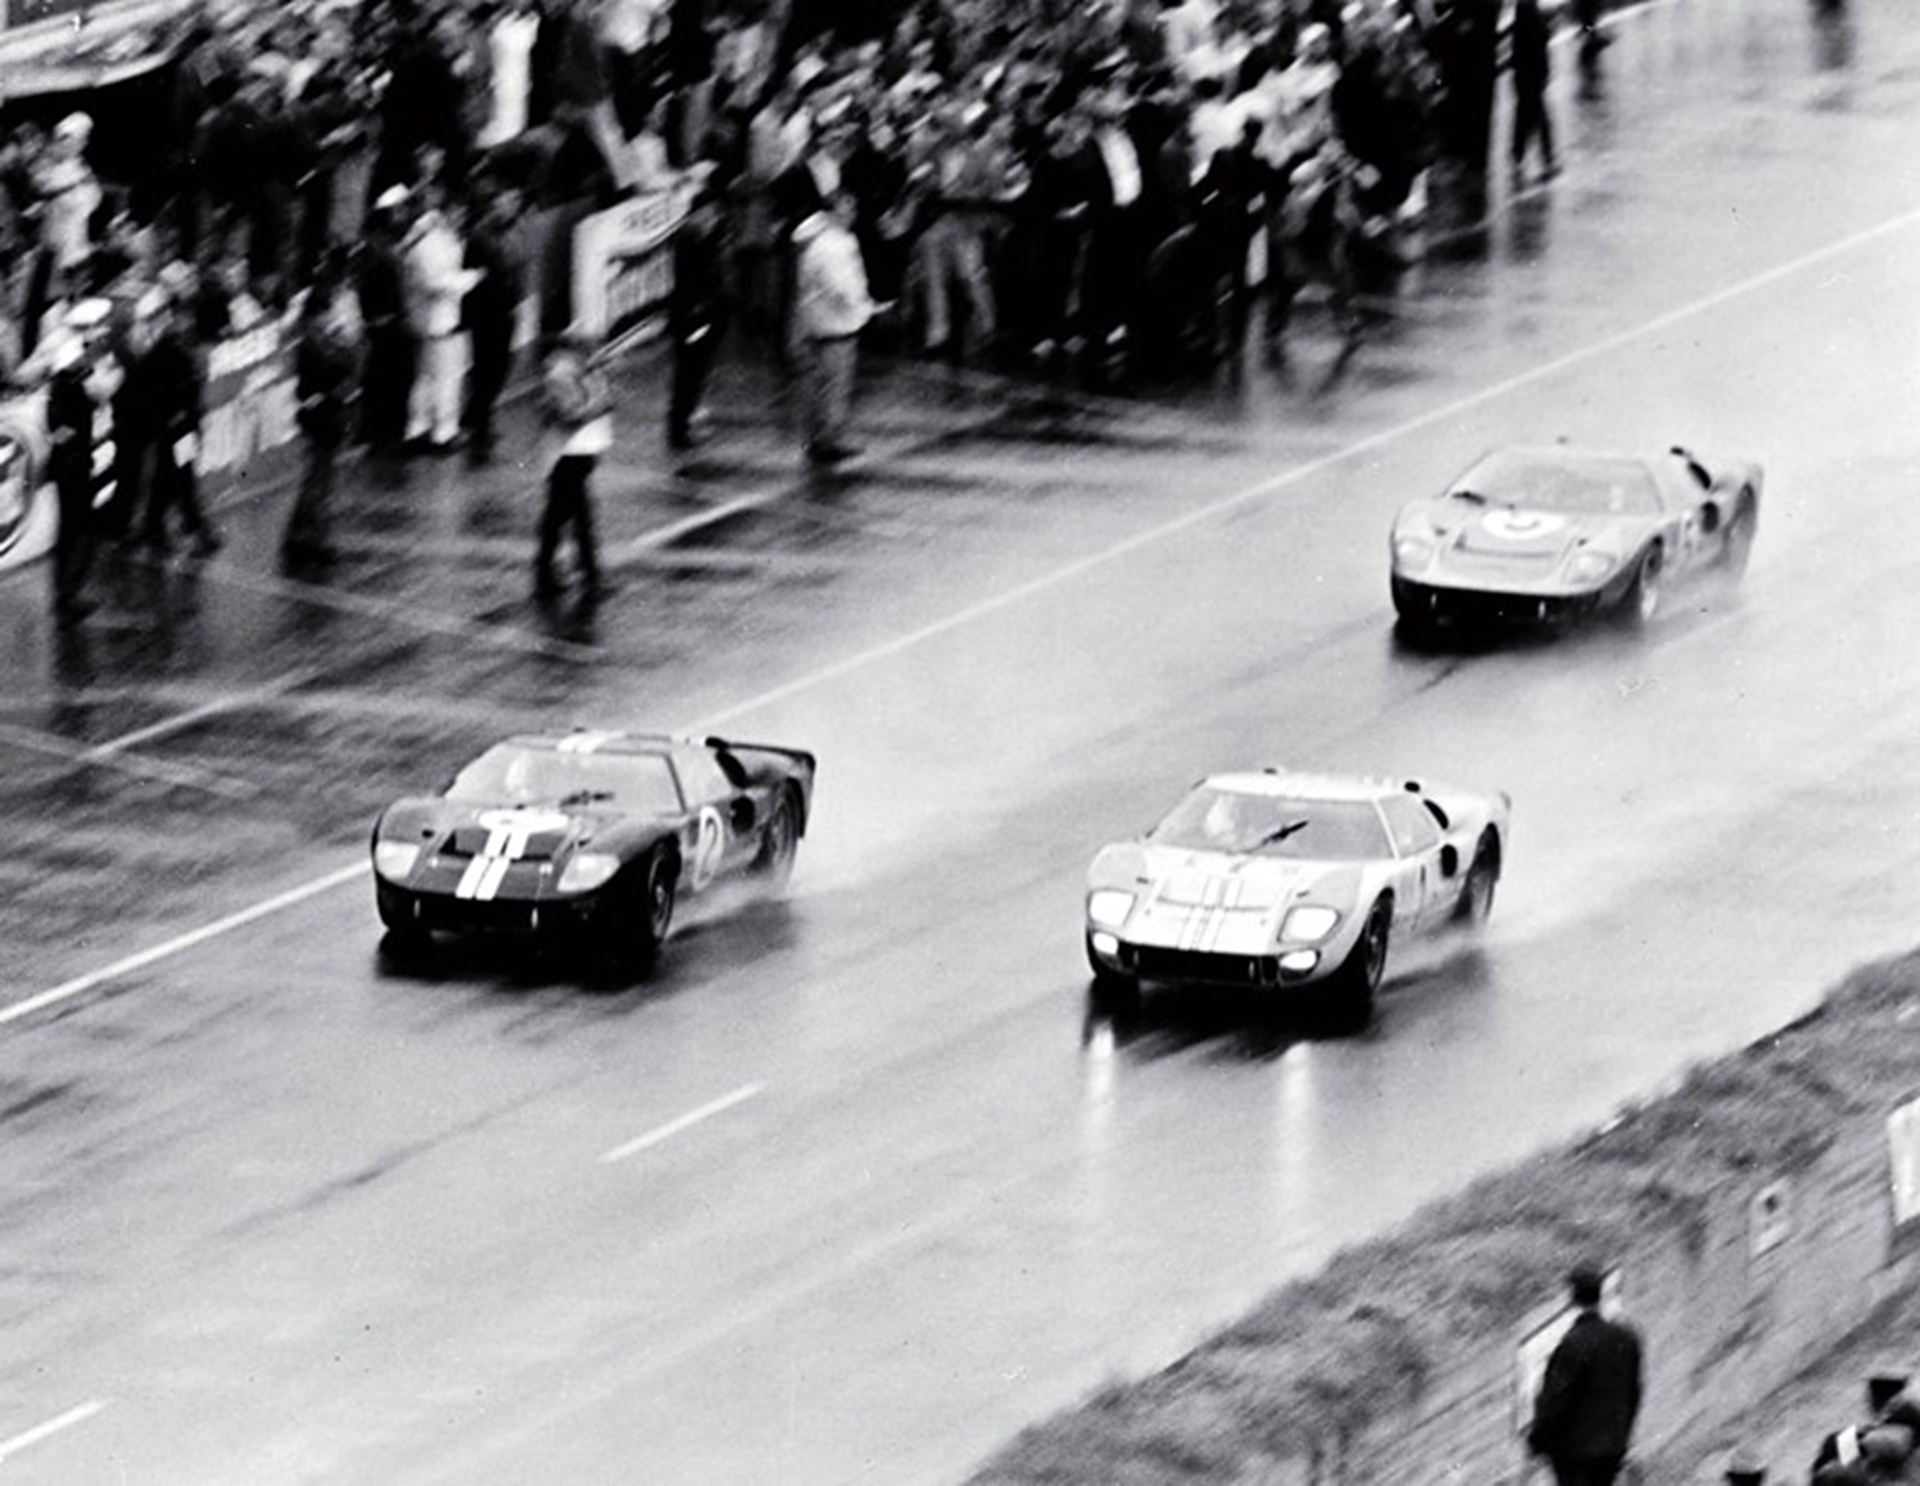  in 1966 claiming the first three places at the Daytona 24 Hours